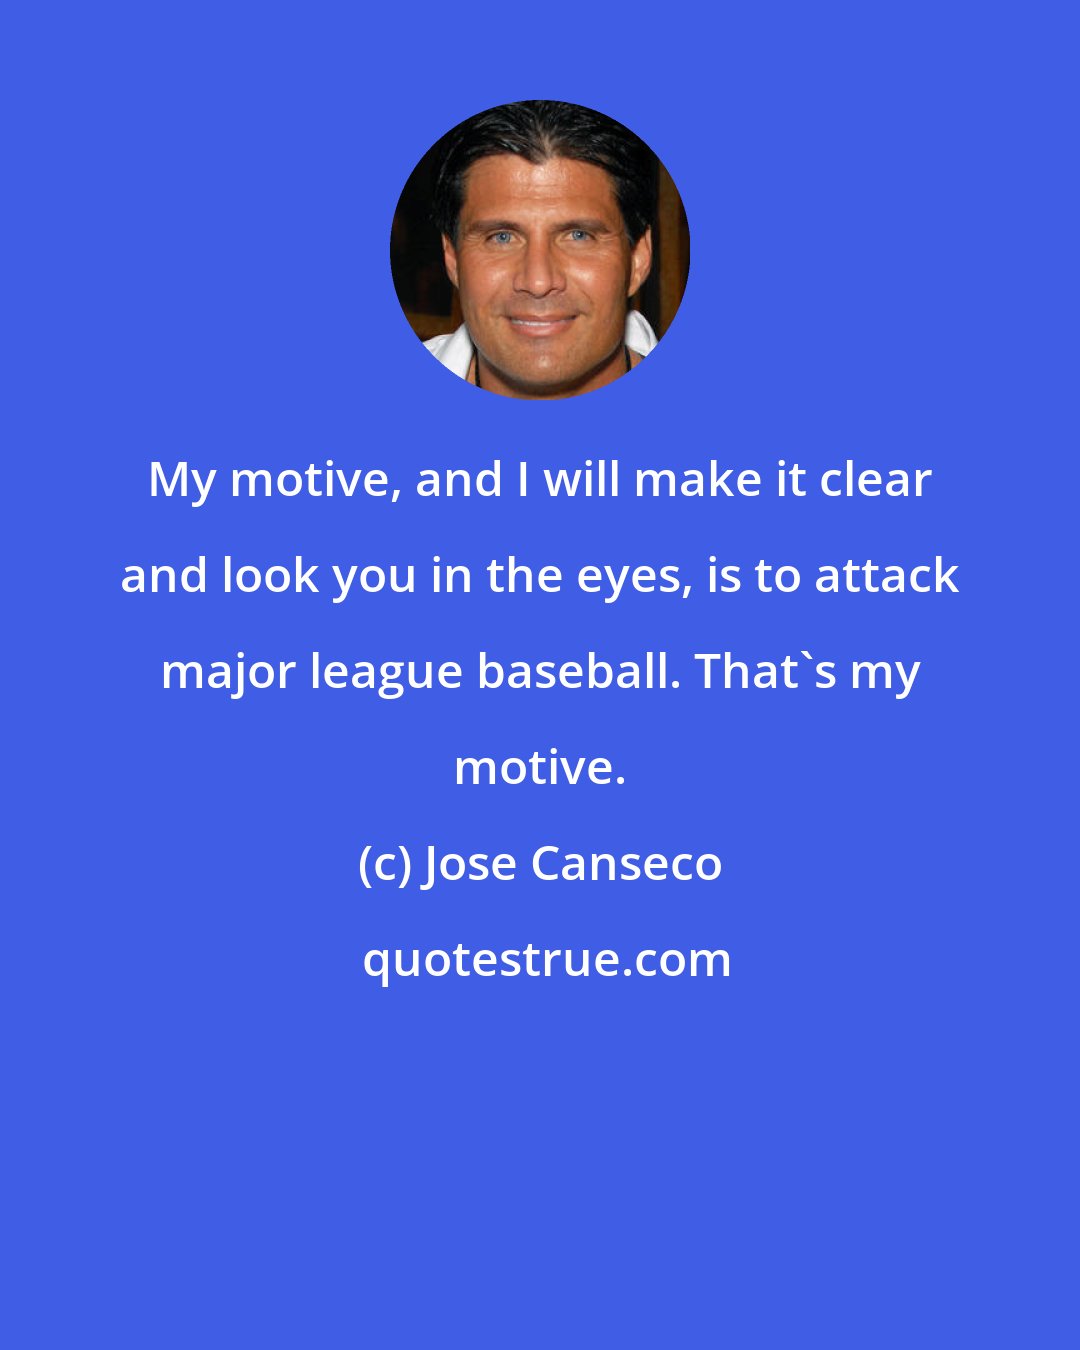 Jose Canseco: My motive, and I will make it clear and look you in the eyes, is to attack major league baseball. That's my motive.